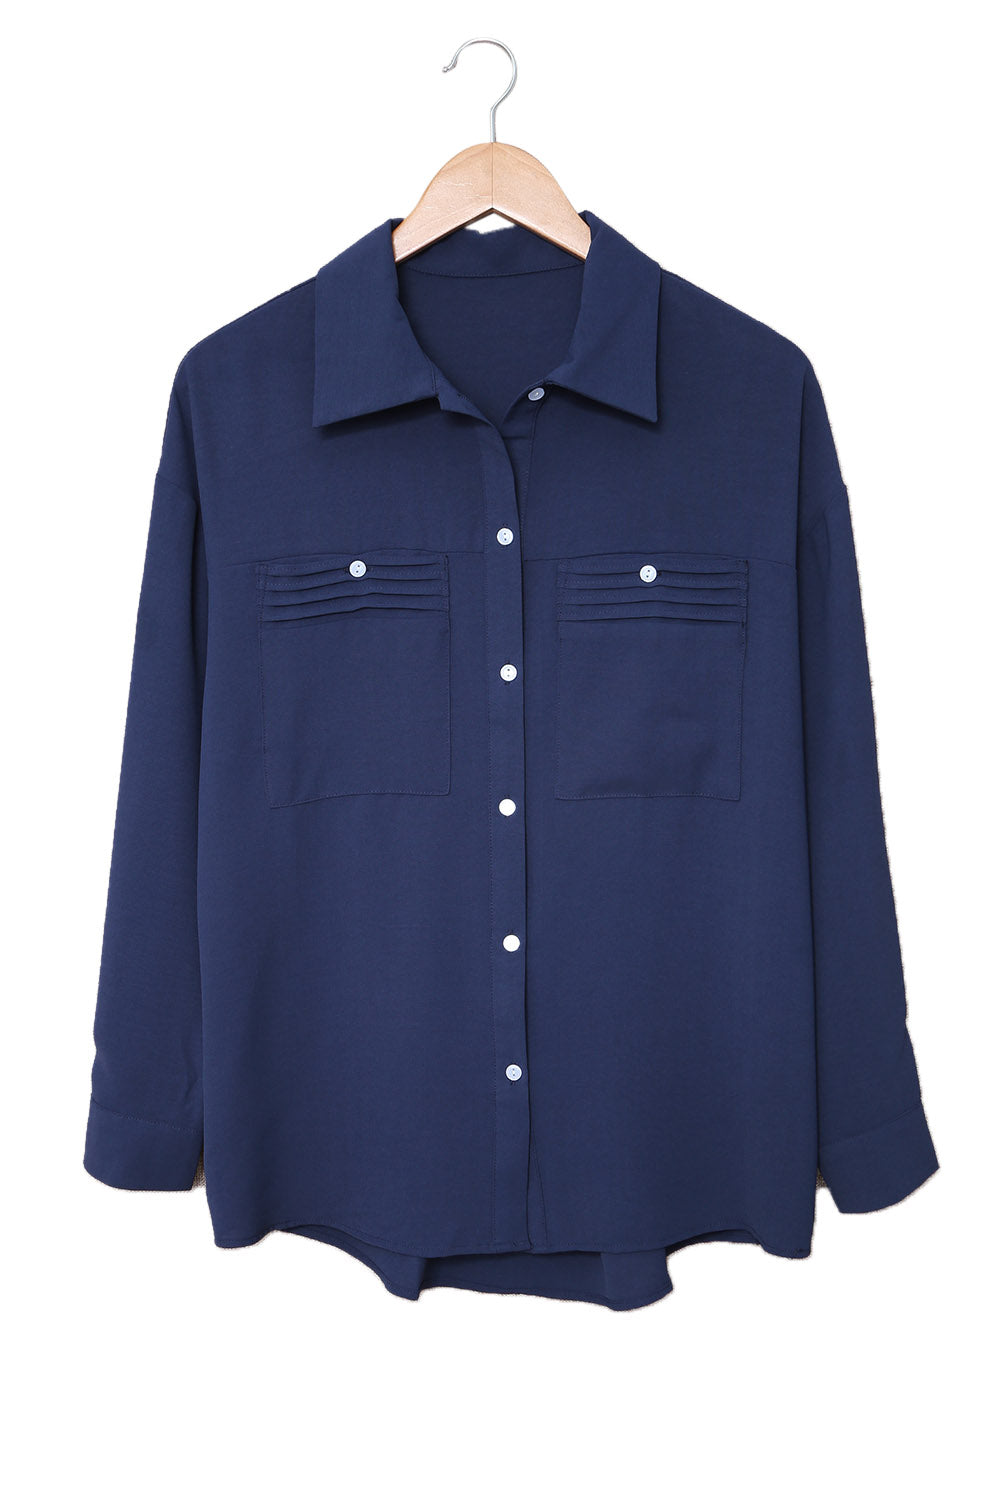 Solid Pocket Long Sleeve Button-Up Shirt